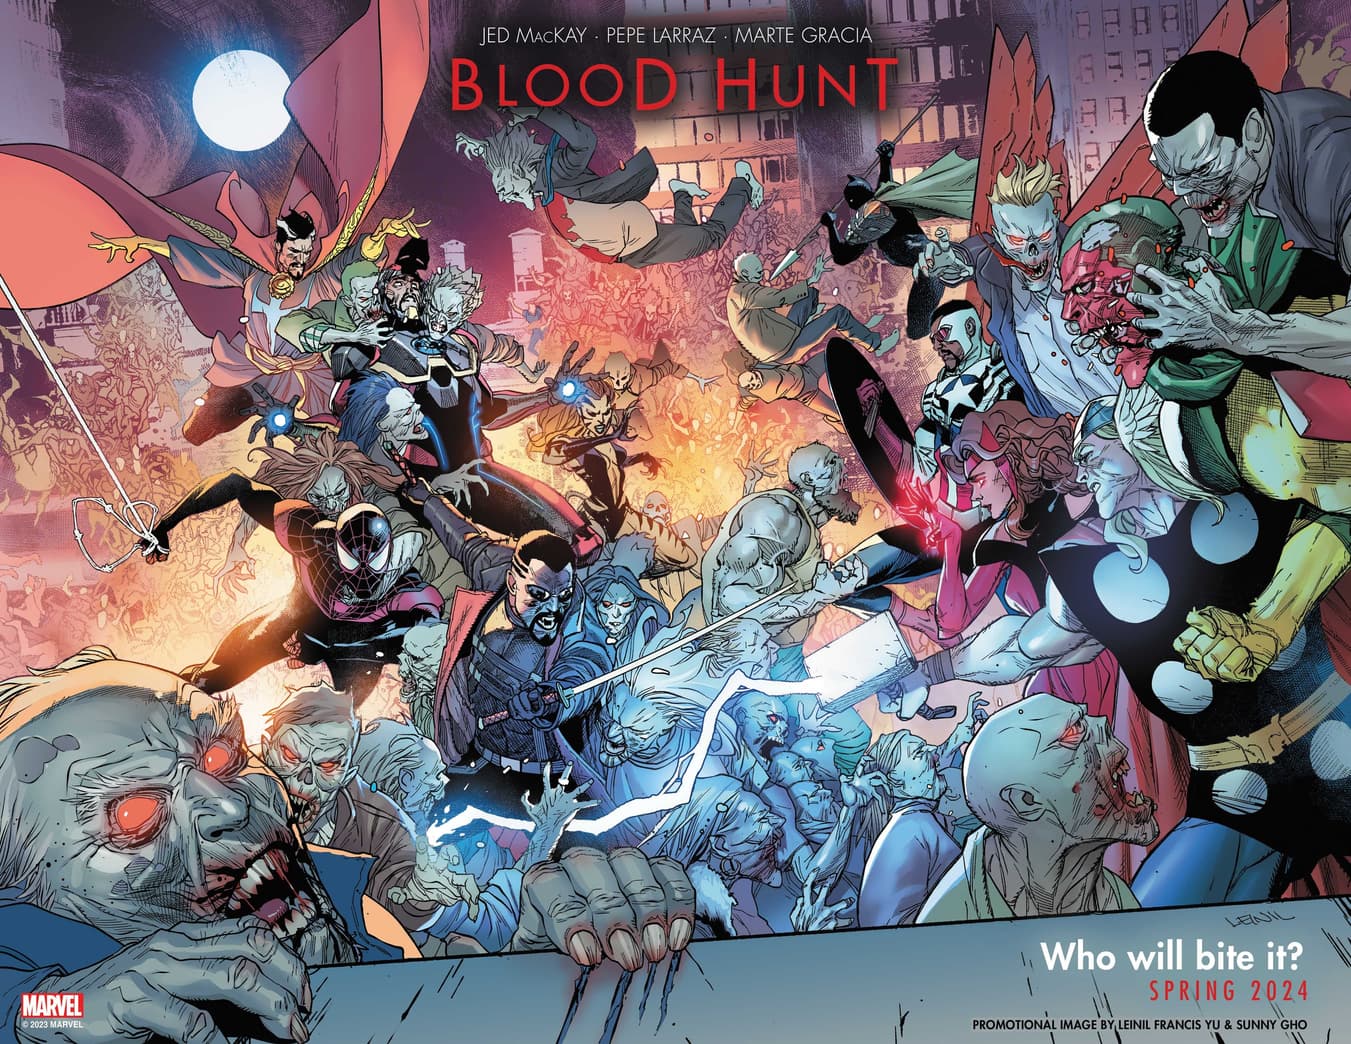 BLOOD HUNT (2024) promotional image by Leinil Francis Yu and Sunny Gho